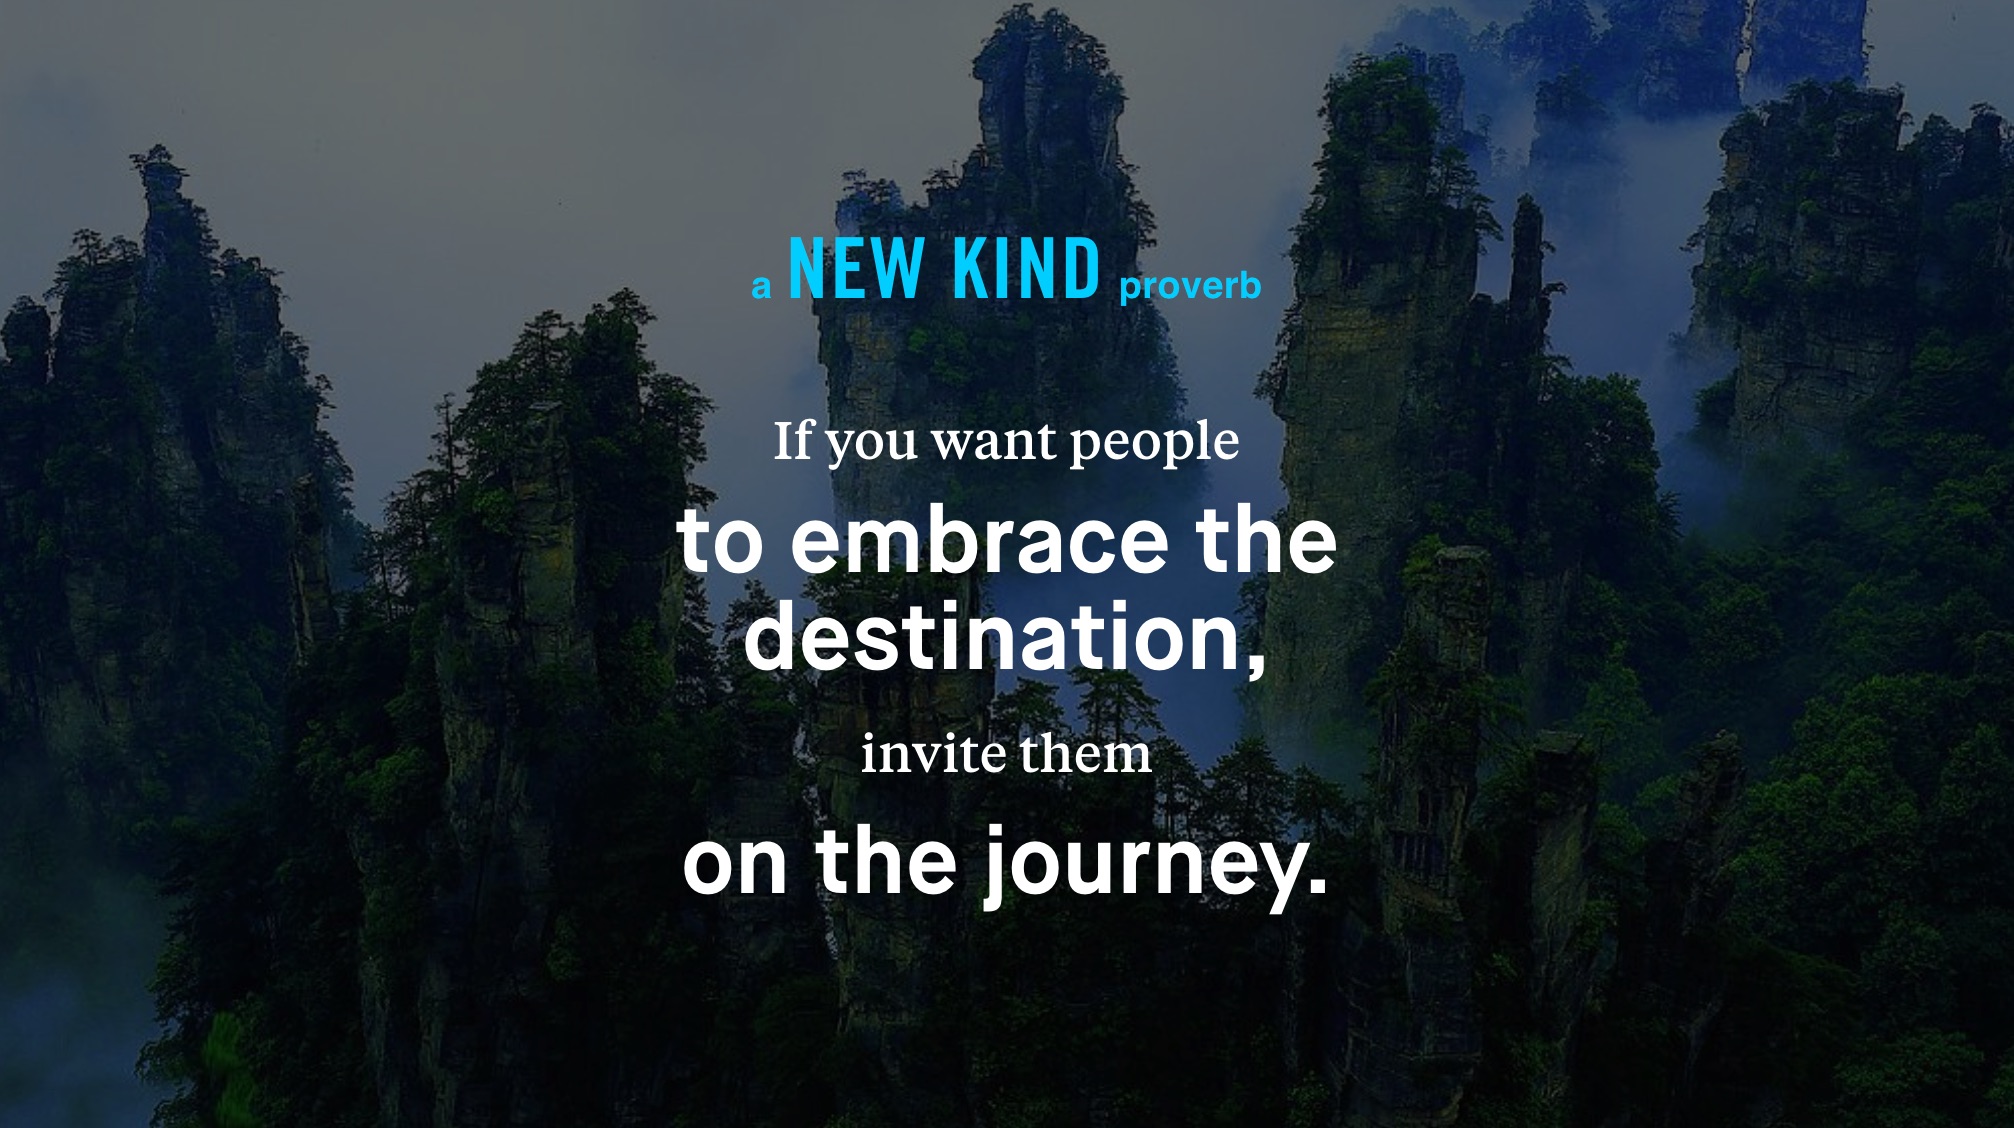 If you want people to embrace the destination, invite them on the journey.